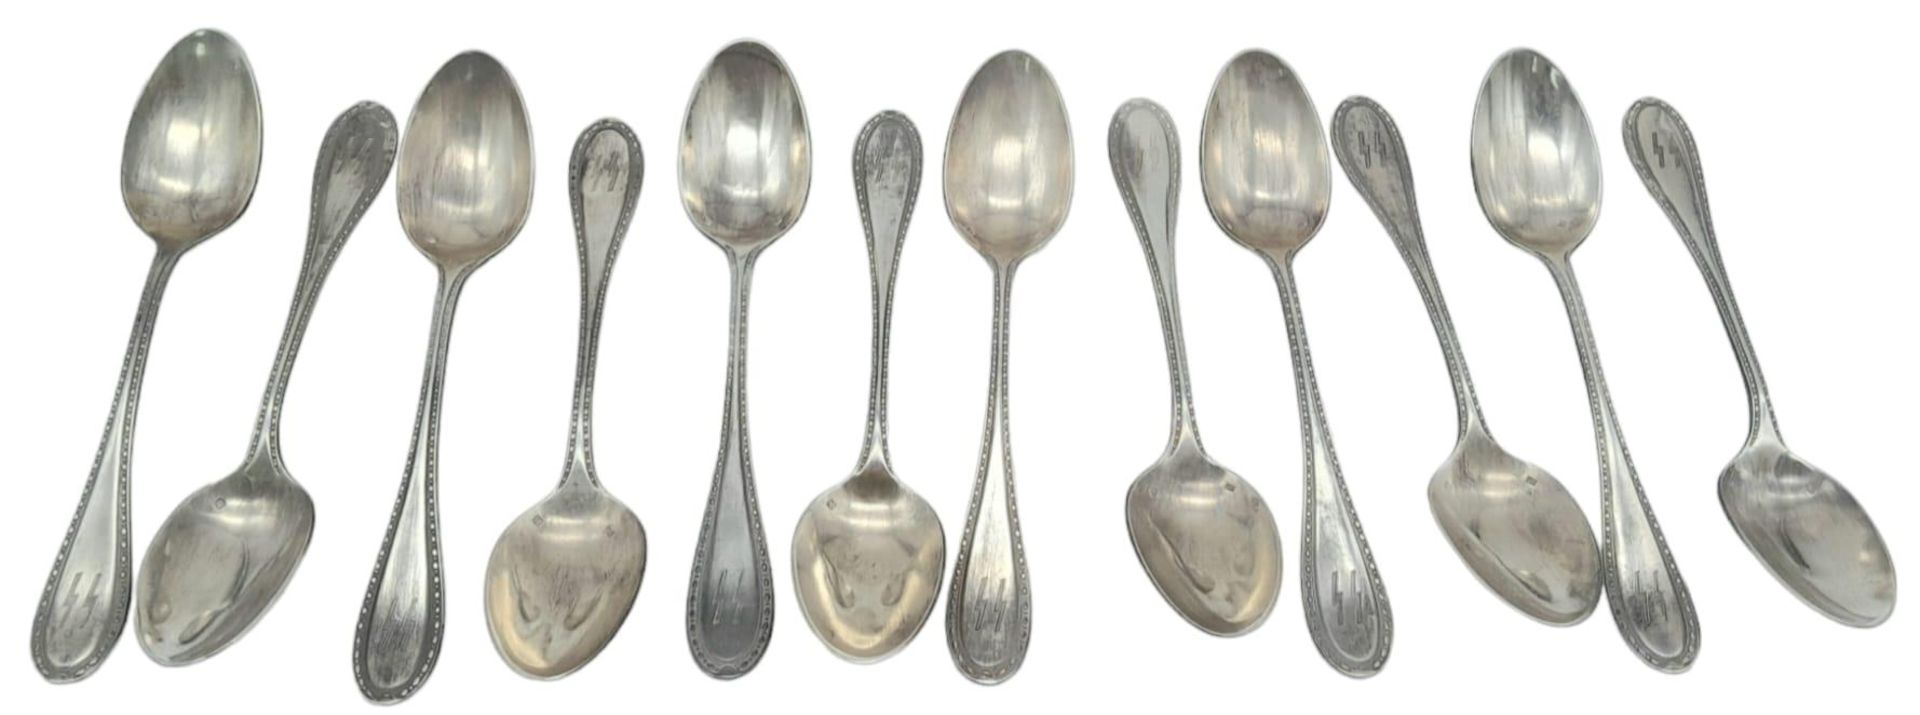 3rd Reich Waffen SS Set of 12 Silver Spoons with makers mark one the bowls. Tested as .800 Silver. - Bild 2 aus 4